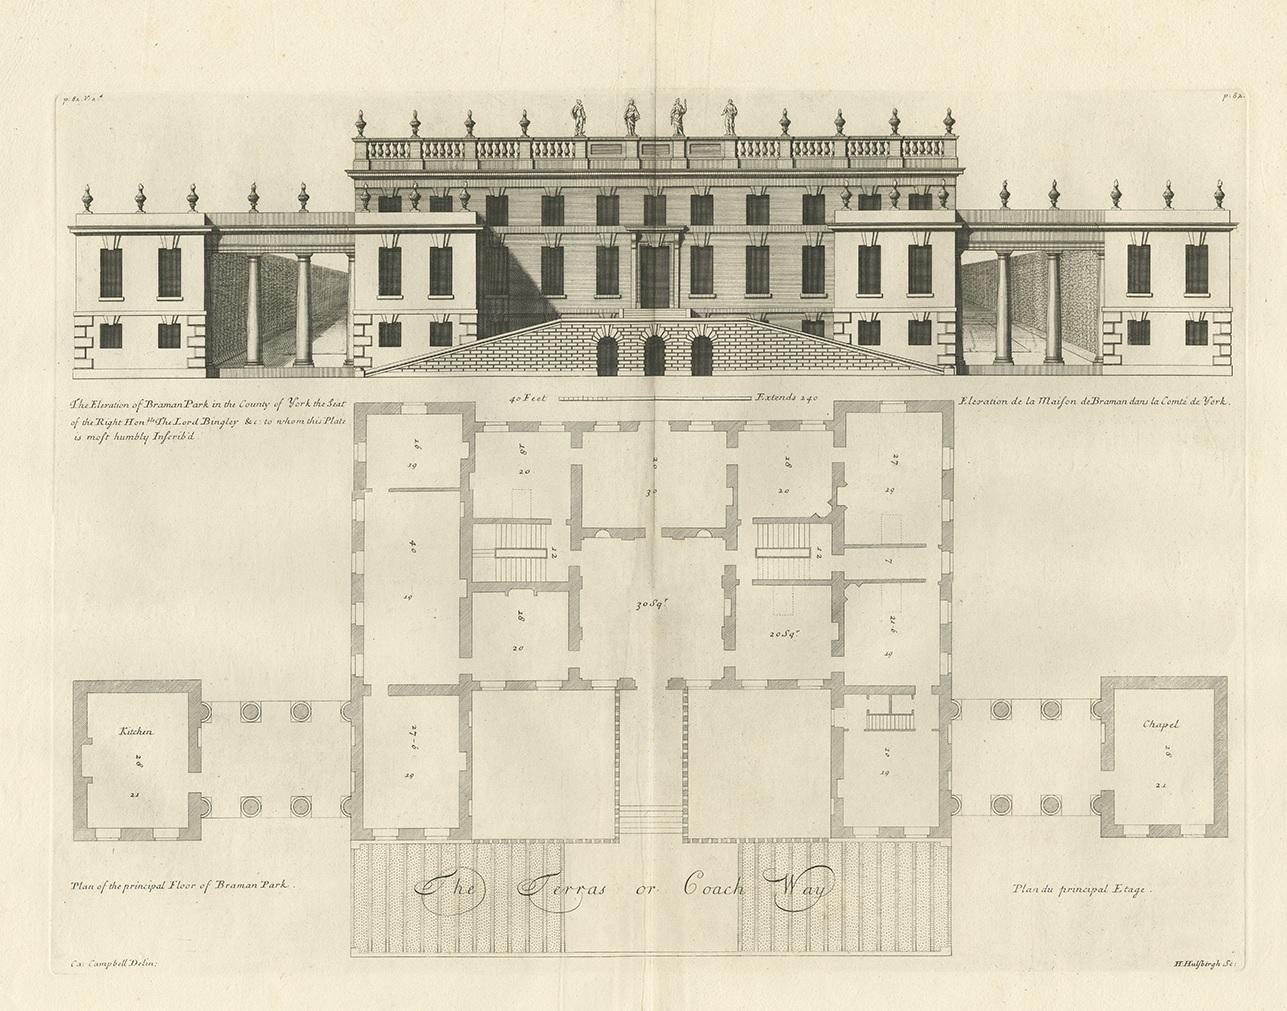 Antique print titled 'The Elevation of Braman Park (..)'. Old engraving of Bramham Park in Bramham. This print originates from 'Vitruvius Britannicus' by Colen Campbell. Colen Campbell's Vitruvius Britannicus is considered one of the greatest